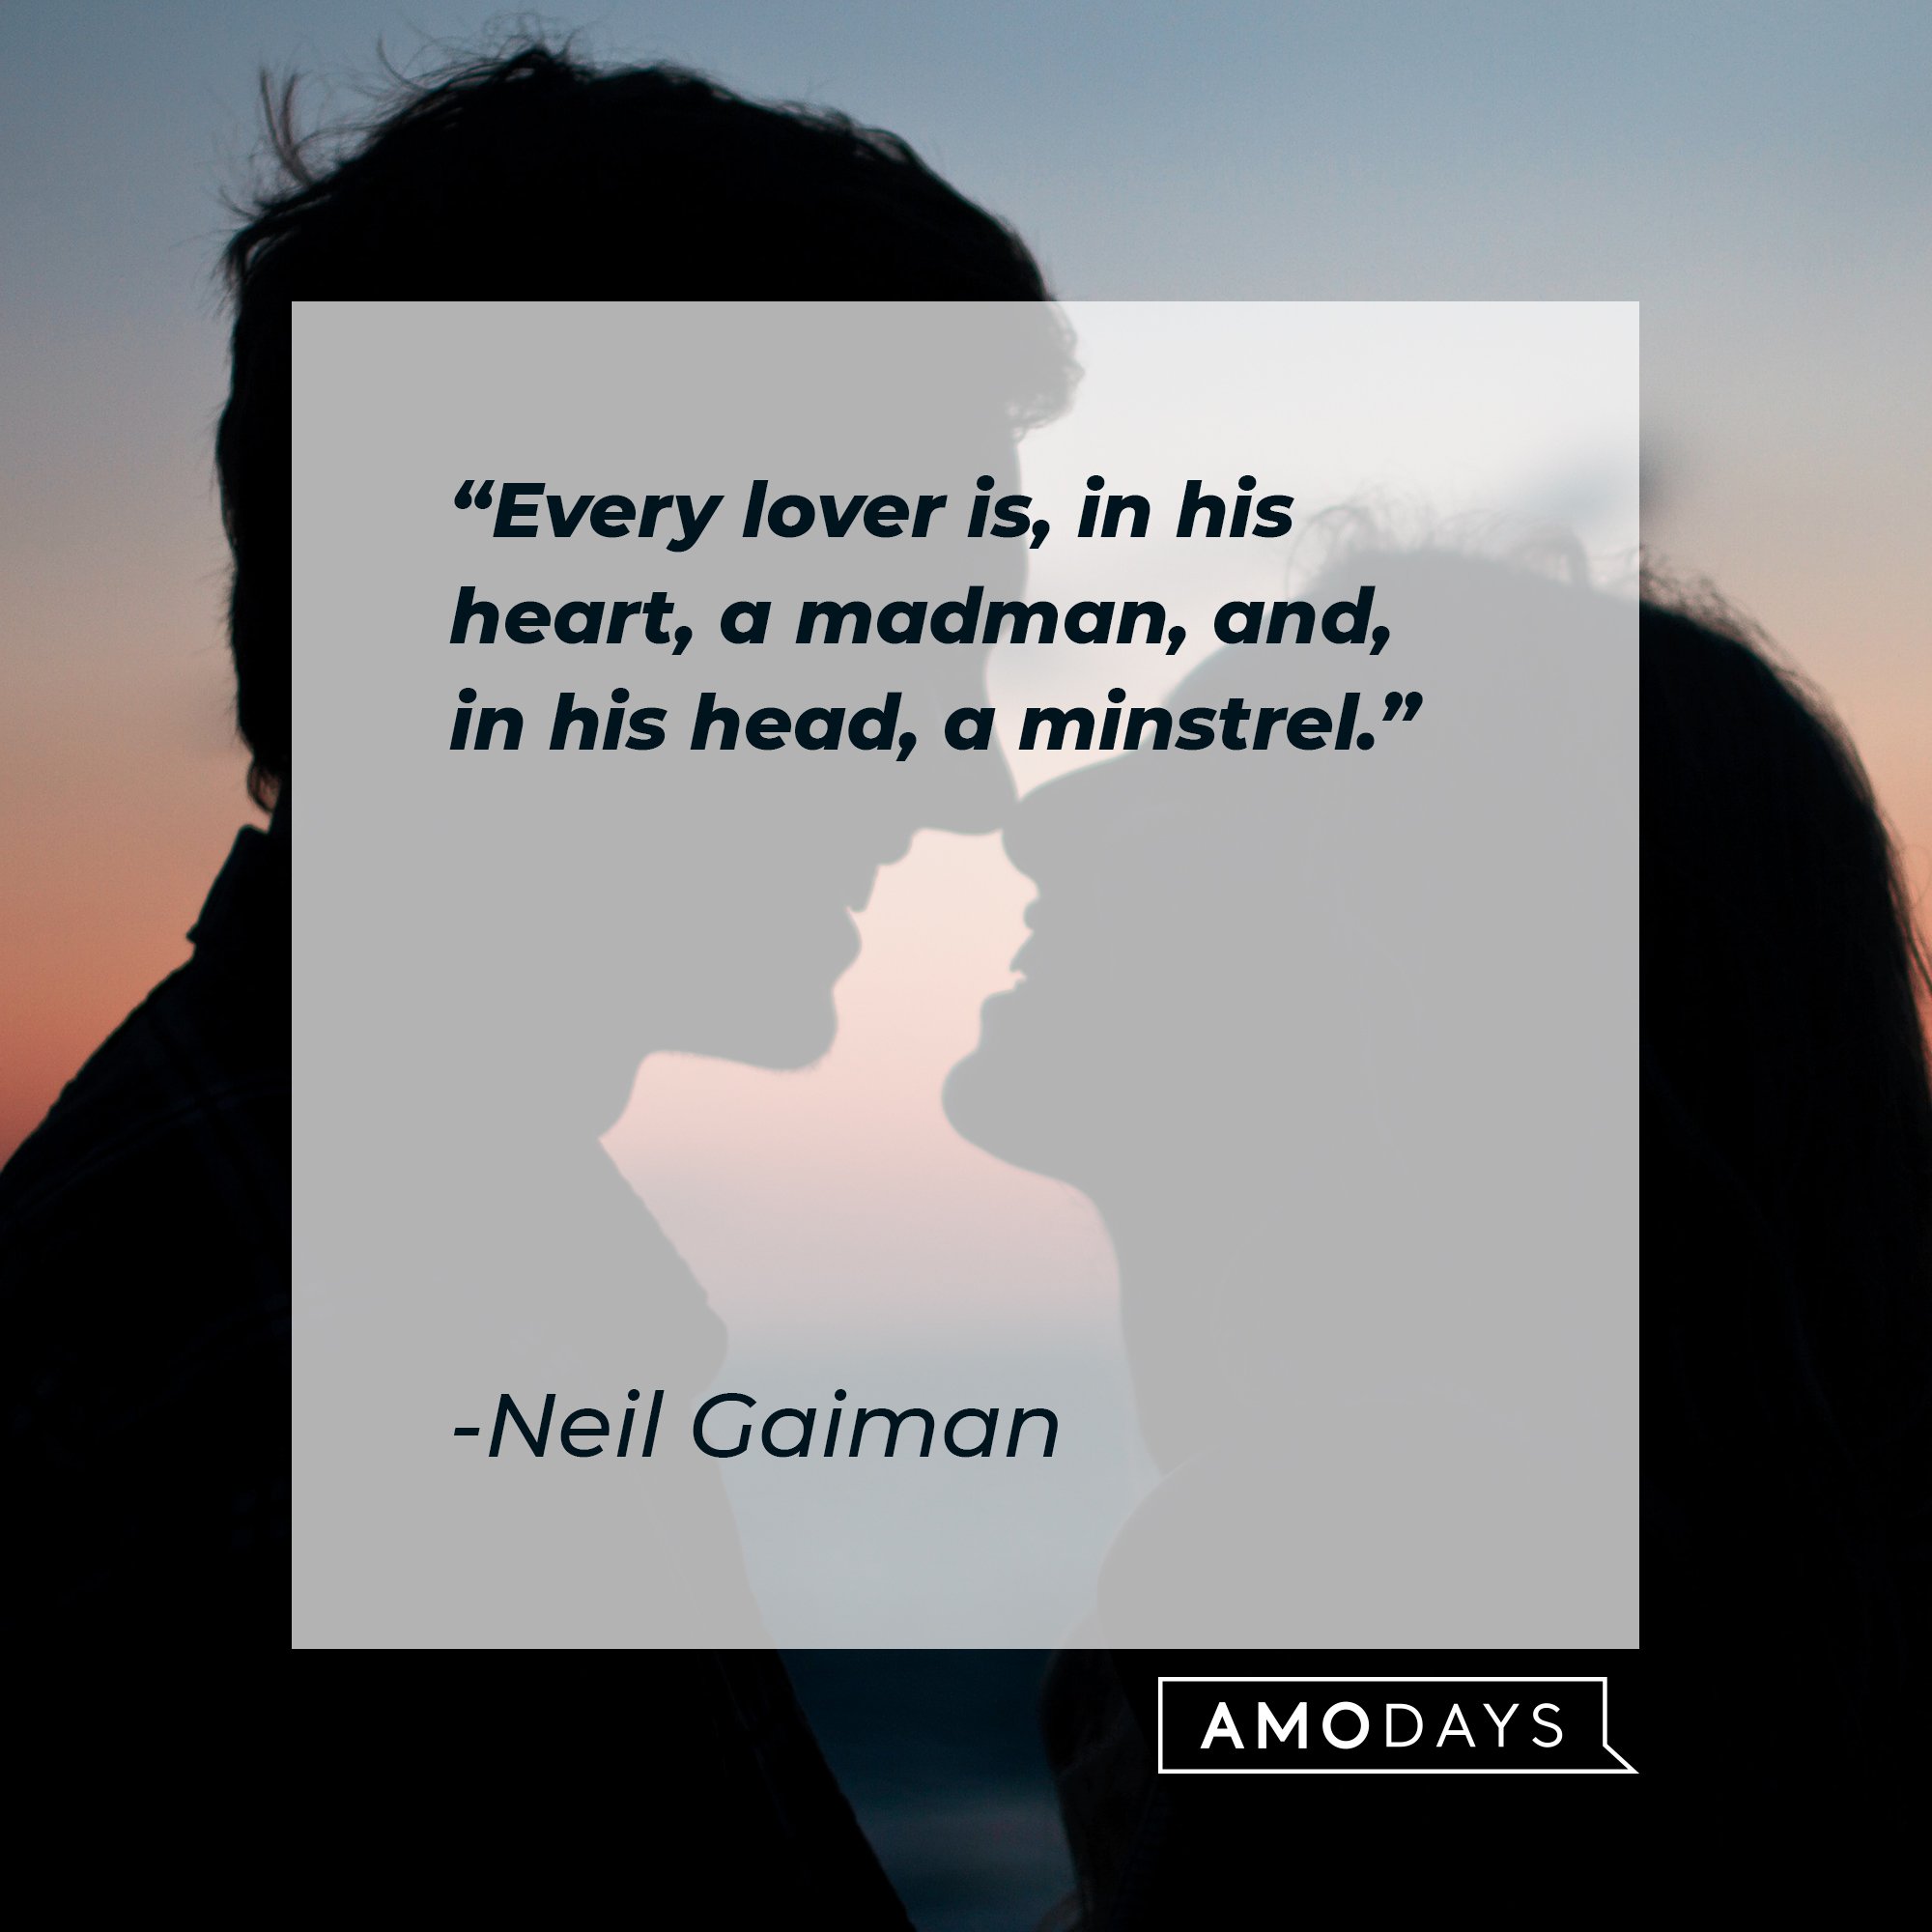 Neil Gaiman's quote: "Every lover is, in his heart, a madman, and, in his head, a minstrel." | Image: AmoDays